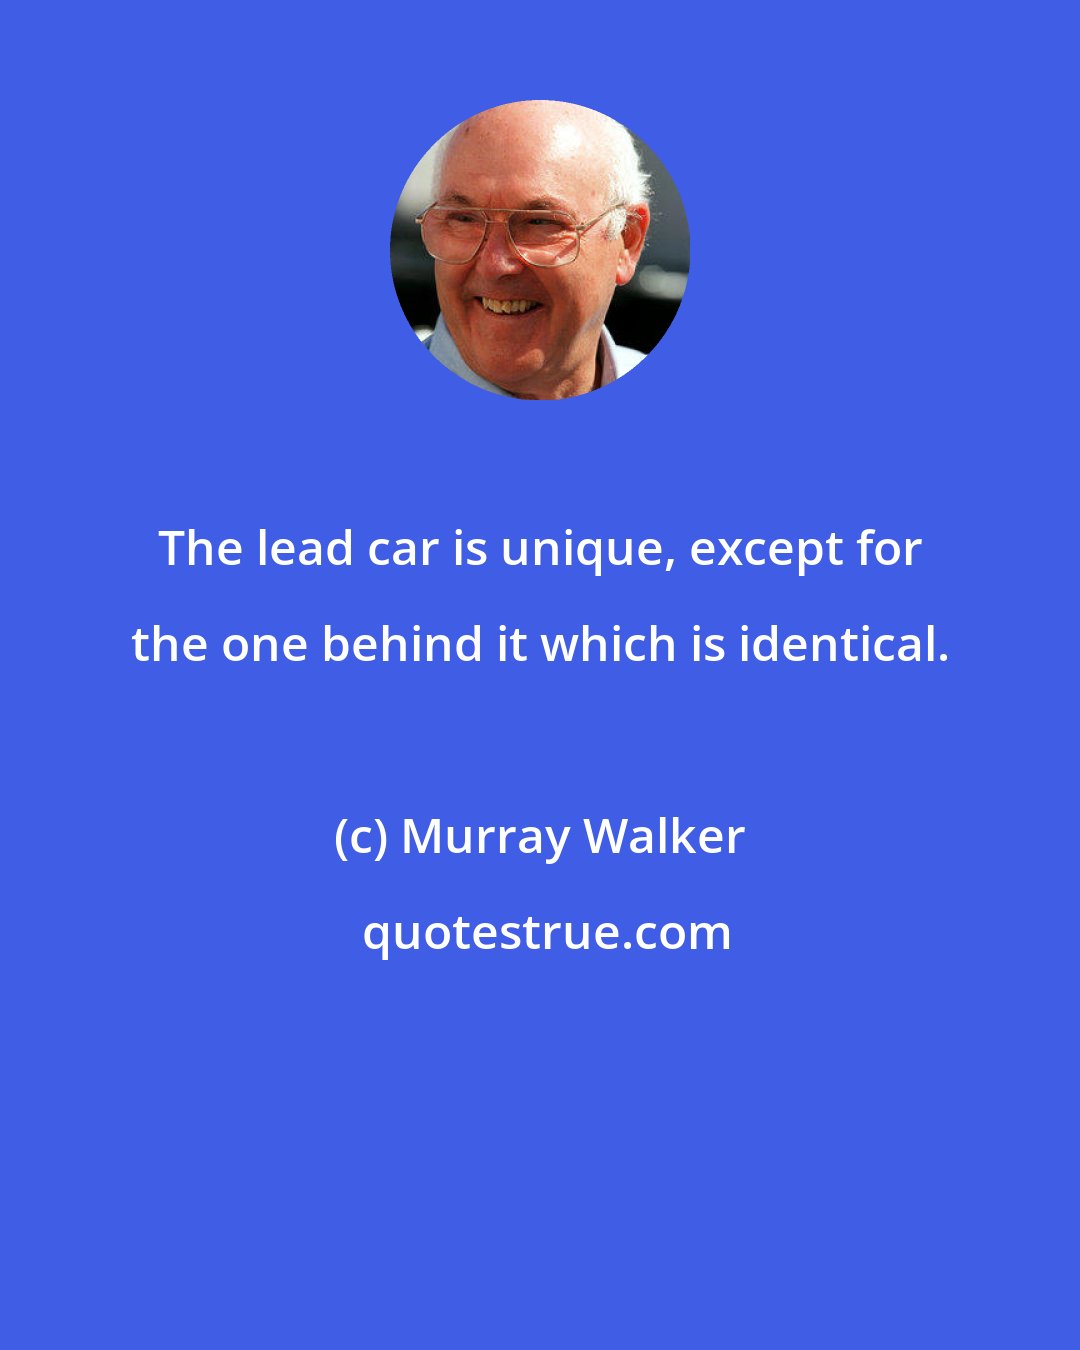 Murray Walker: The lead car is unique, except for the one behind it which is identical.